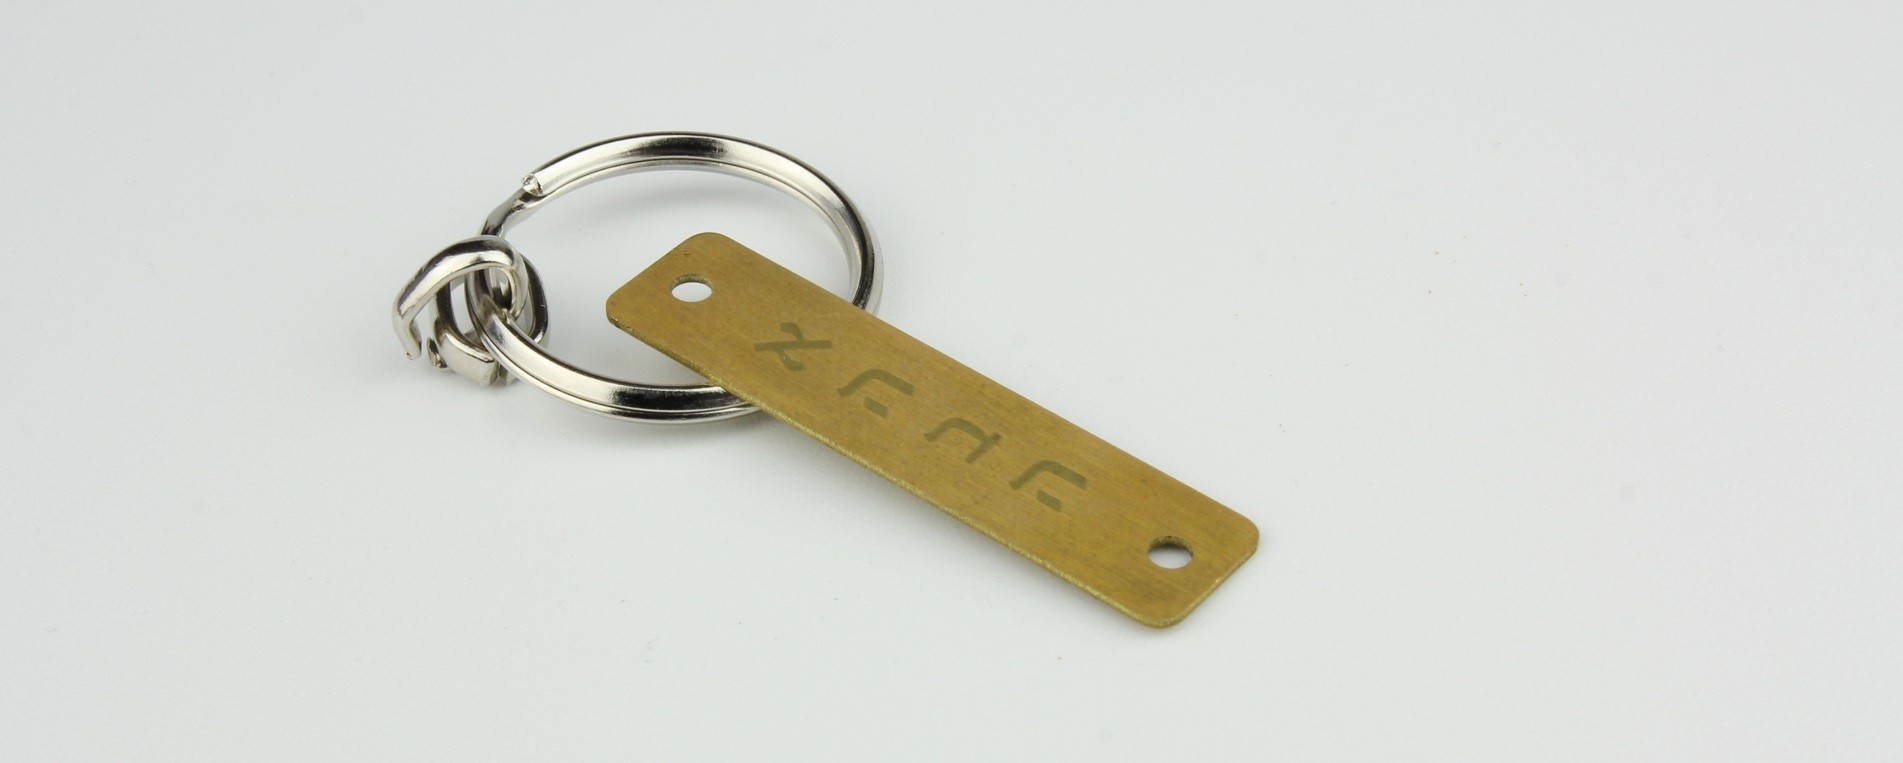 Laser cutting and marking of Brass tags - 0.5 mm thick